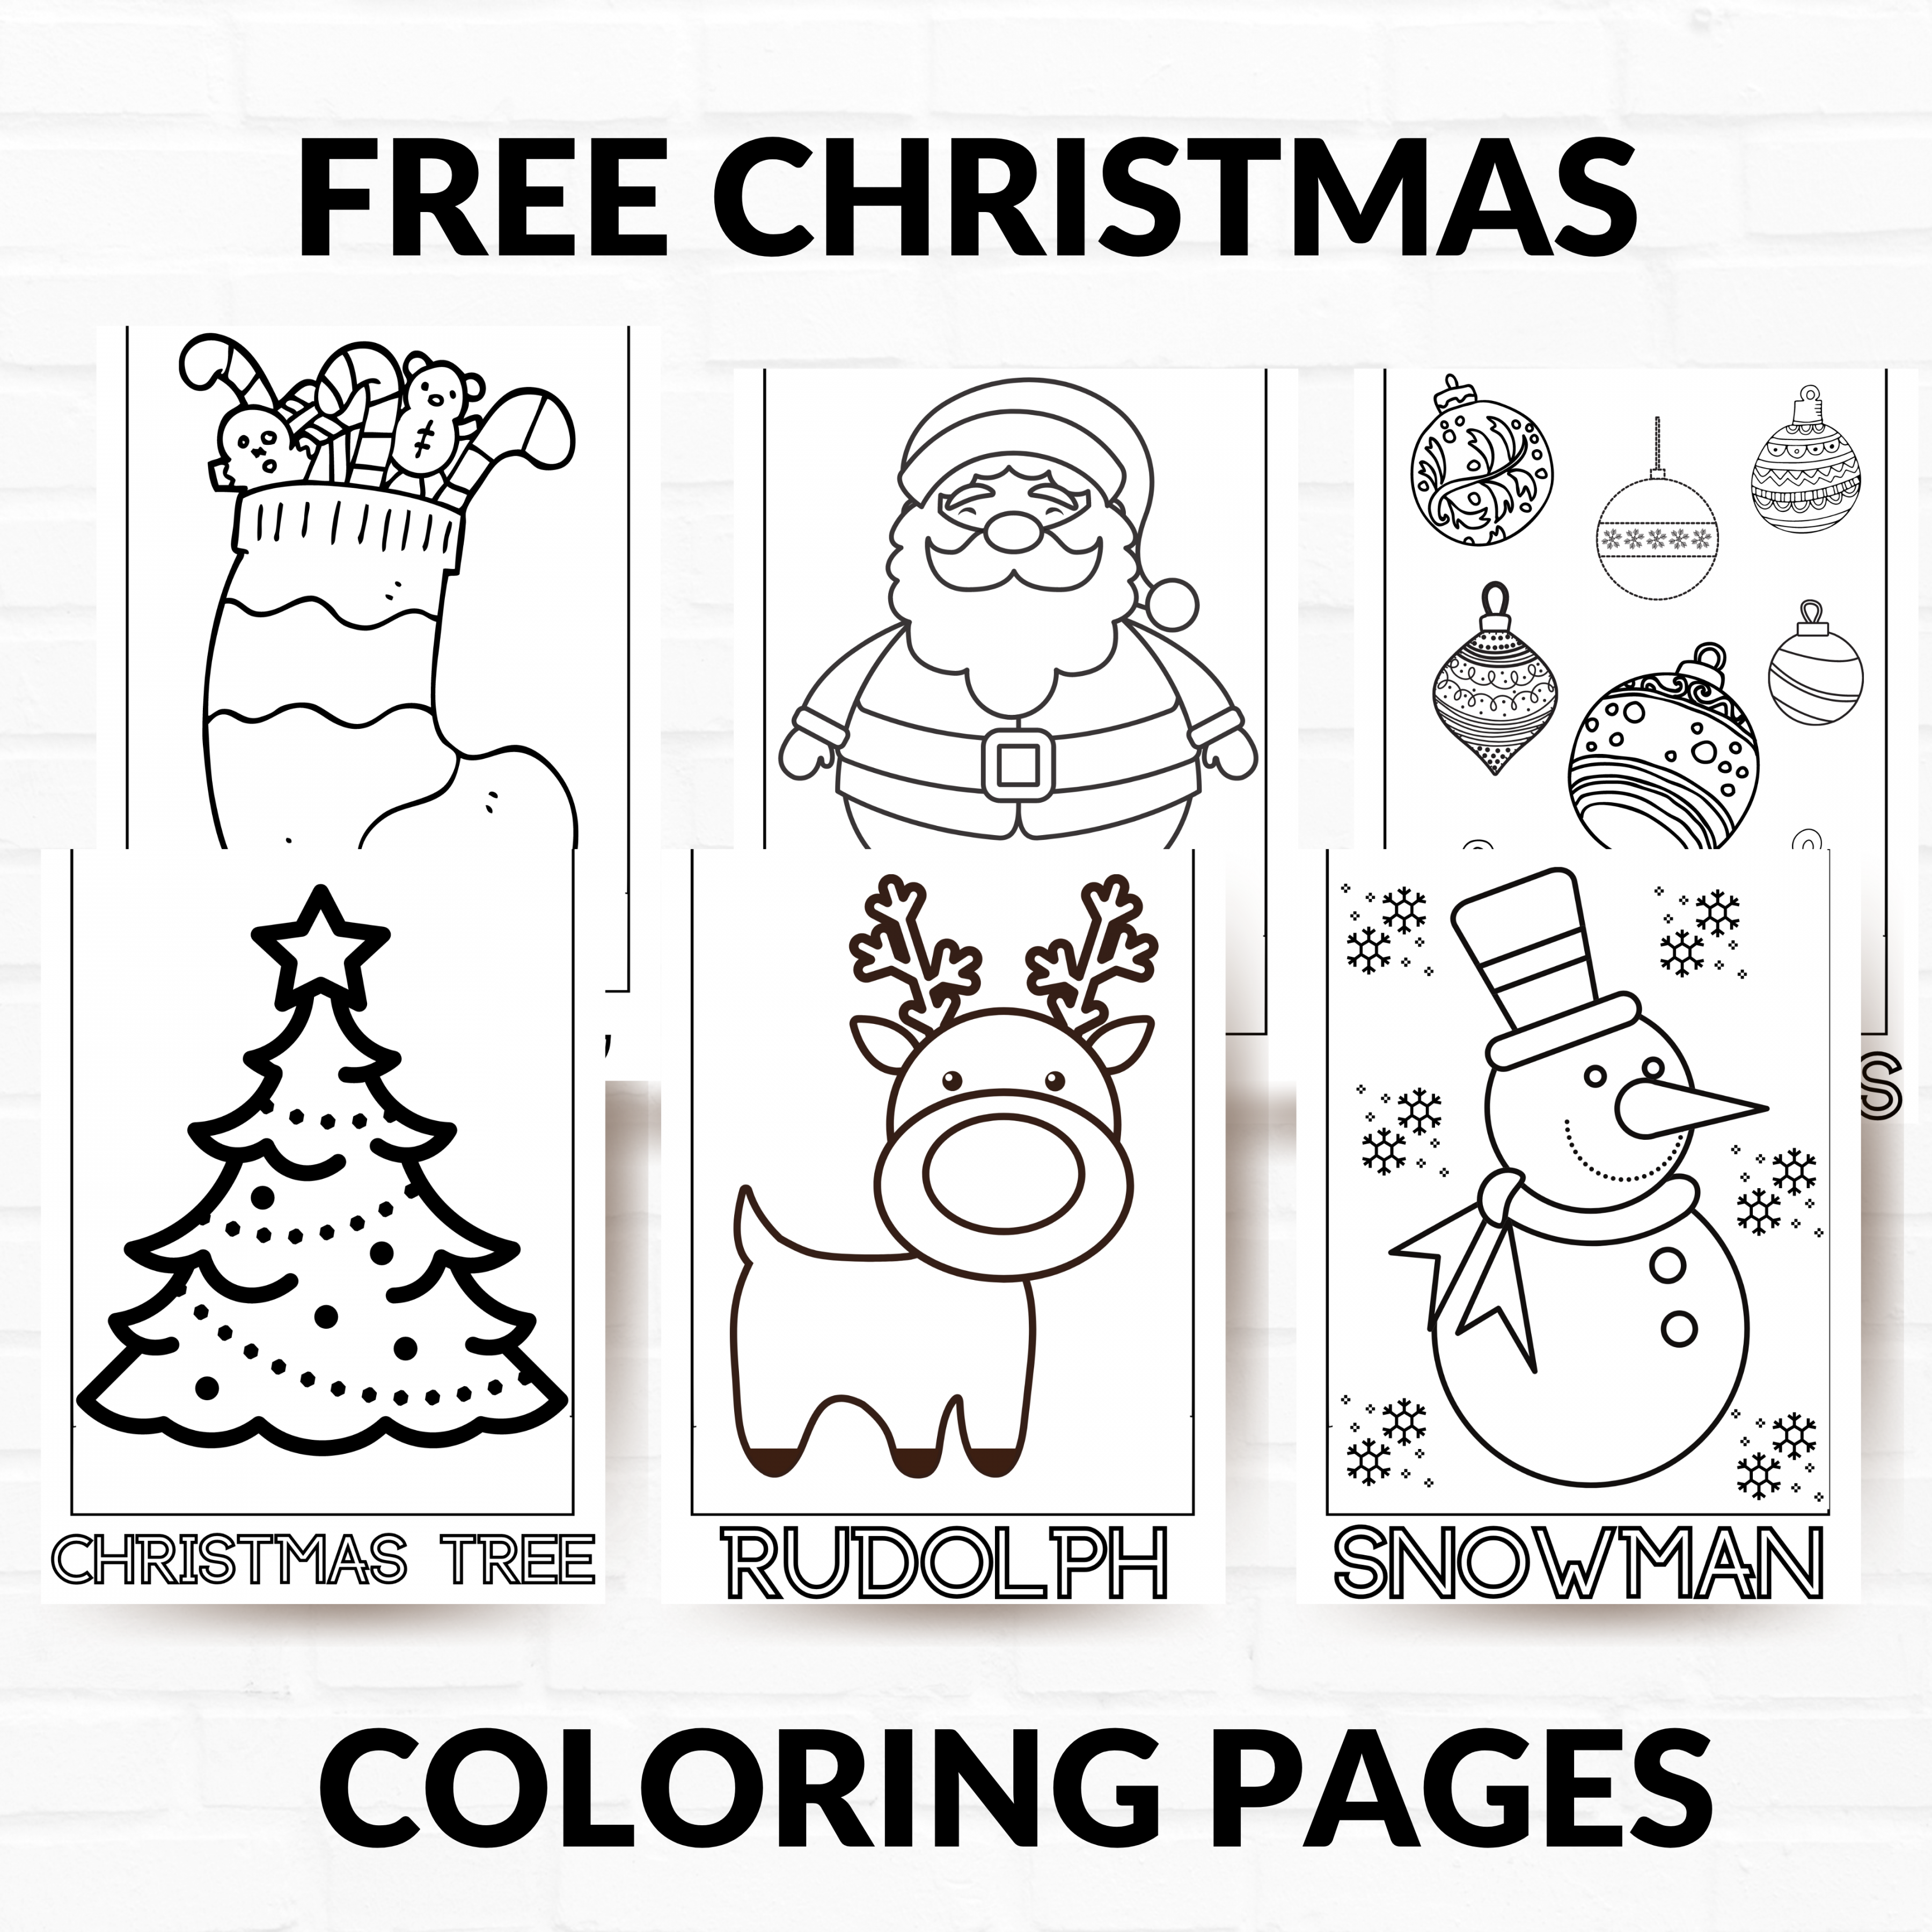 Free Printable Christmas Coloring Pages - Printable - Free Printable Christmas Coloring Pages - About a Mom